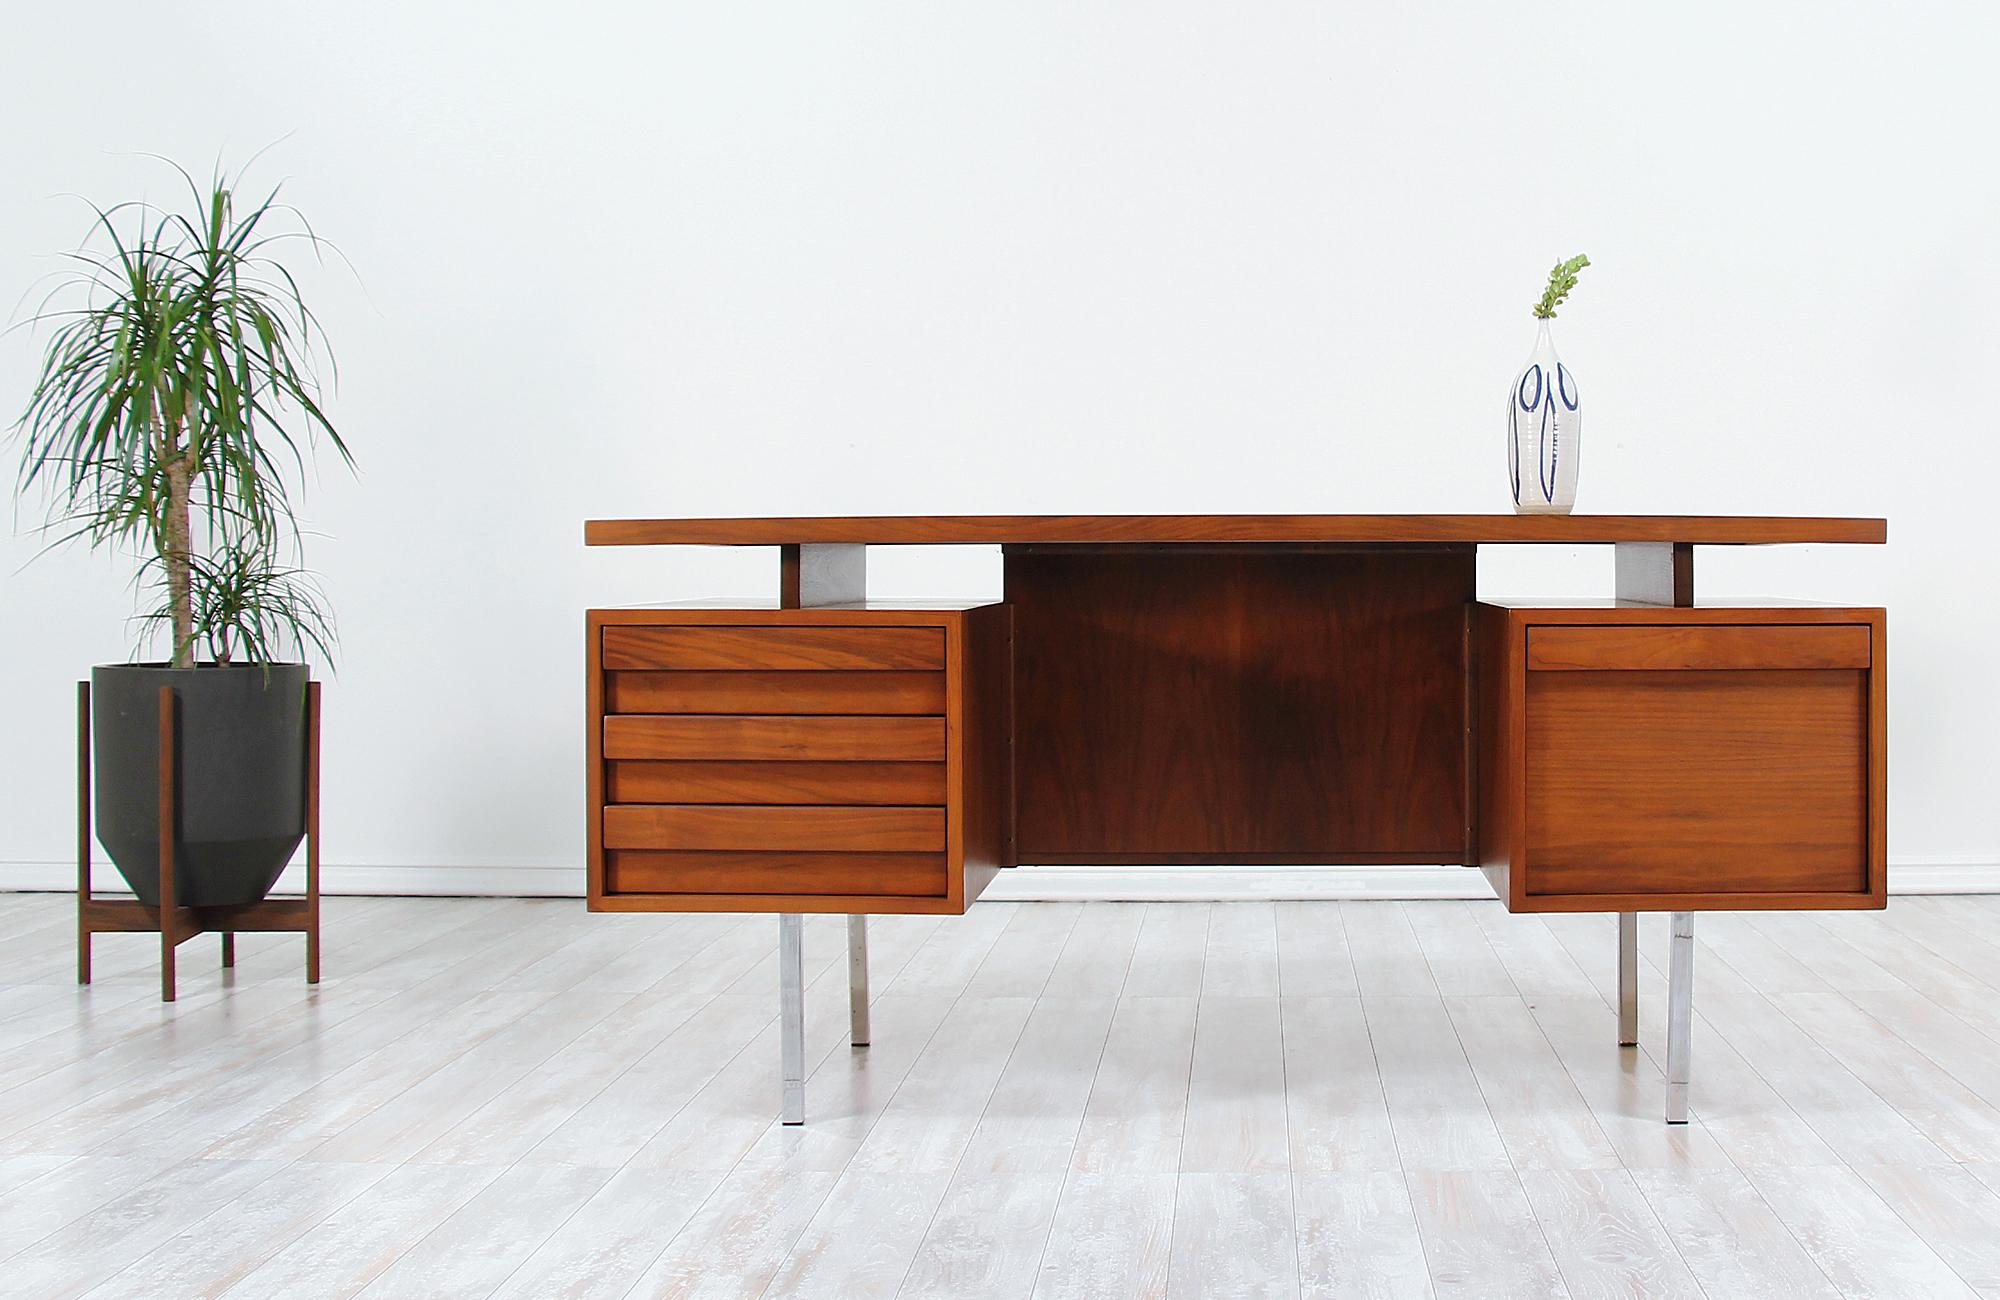 Stylish modern executive desk designed by John Keal for Brown Saltman in the United States circa 1950s. This striking desk is crafted in walnut wood featuring a solid case with chromed steel legs and plenty of storage options that add versatility to